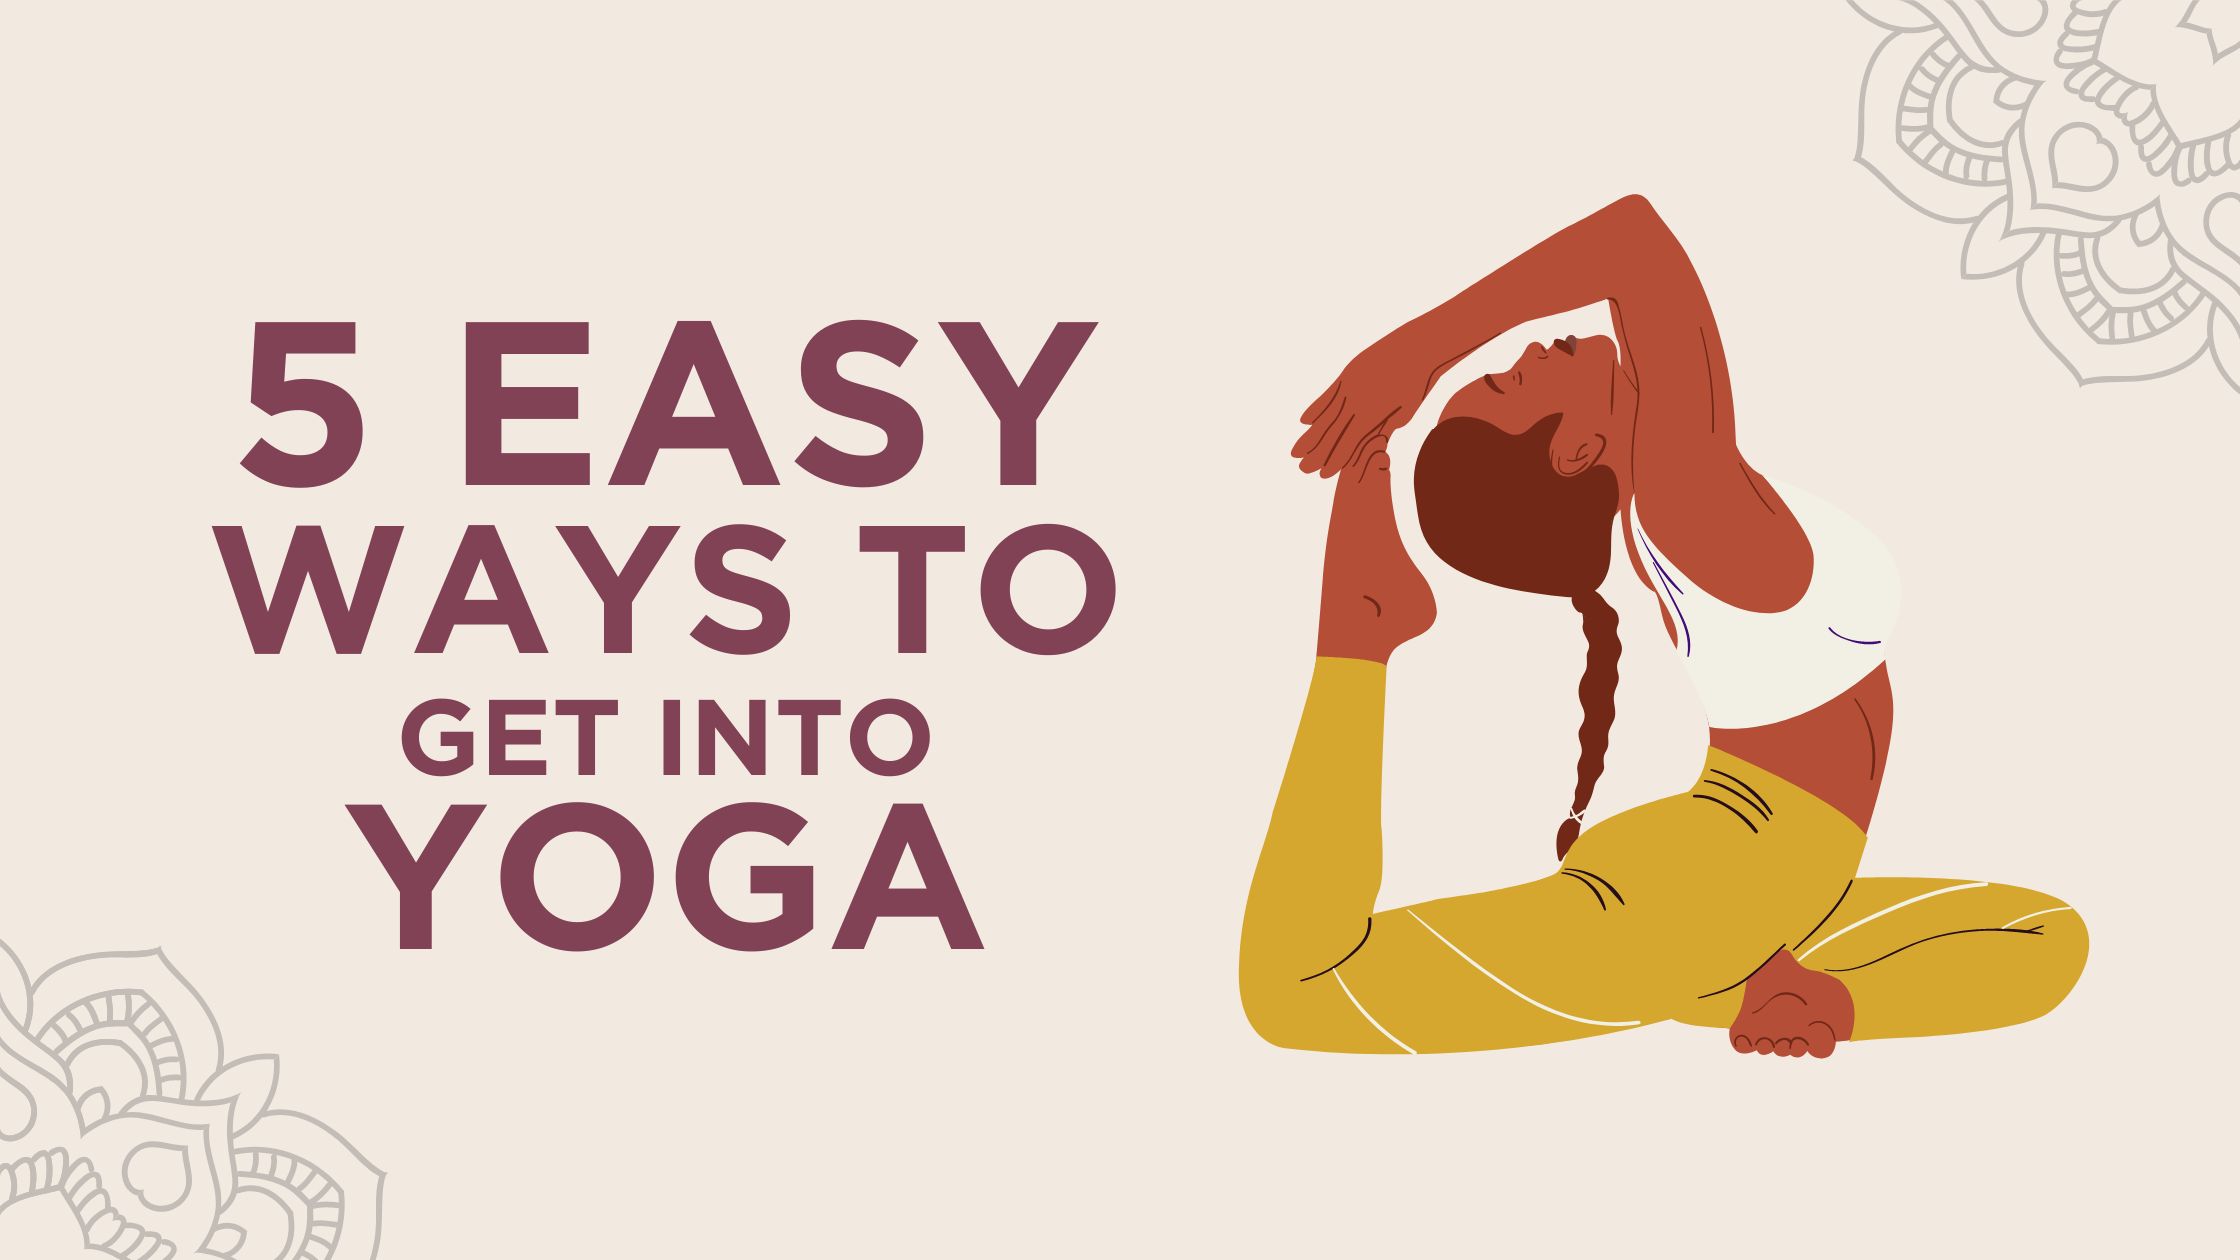 5 Easy Ways to Get Into Yoga